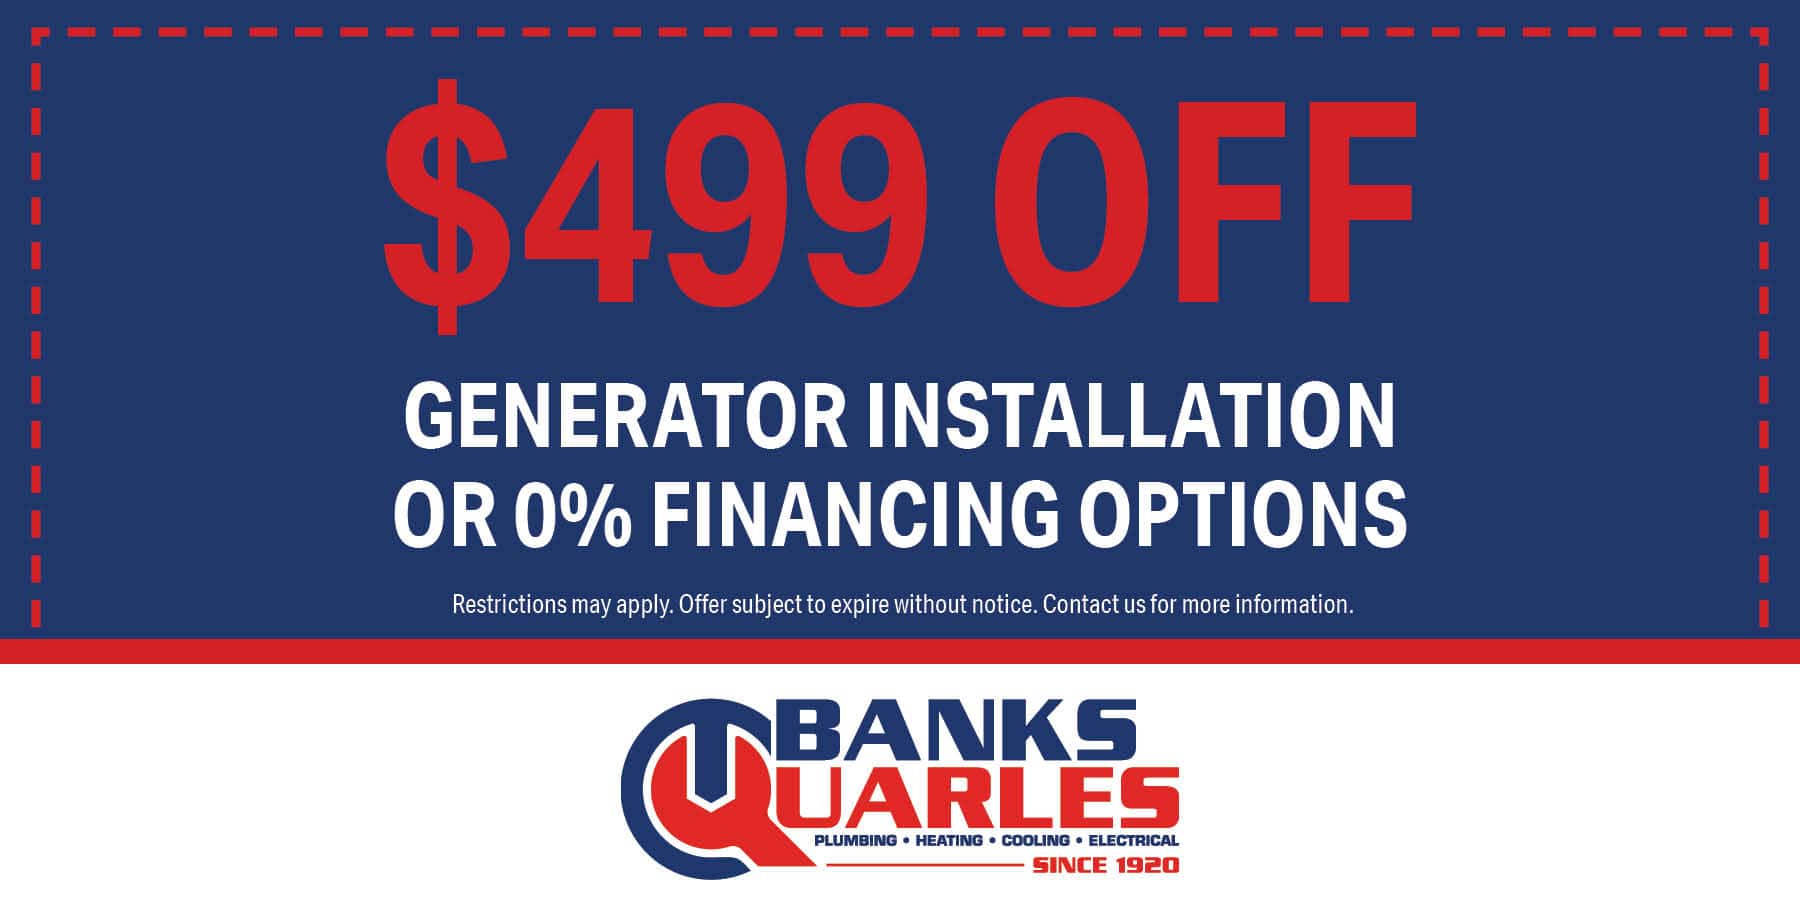 9 off generator installation or 0% financing options. Offer subject to expire without warning. Contact us for details.